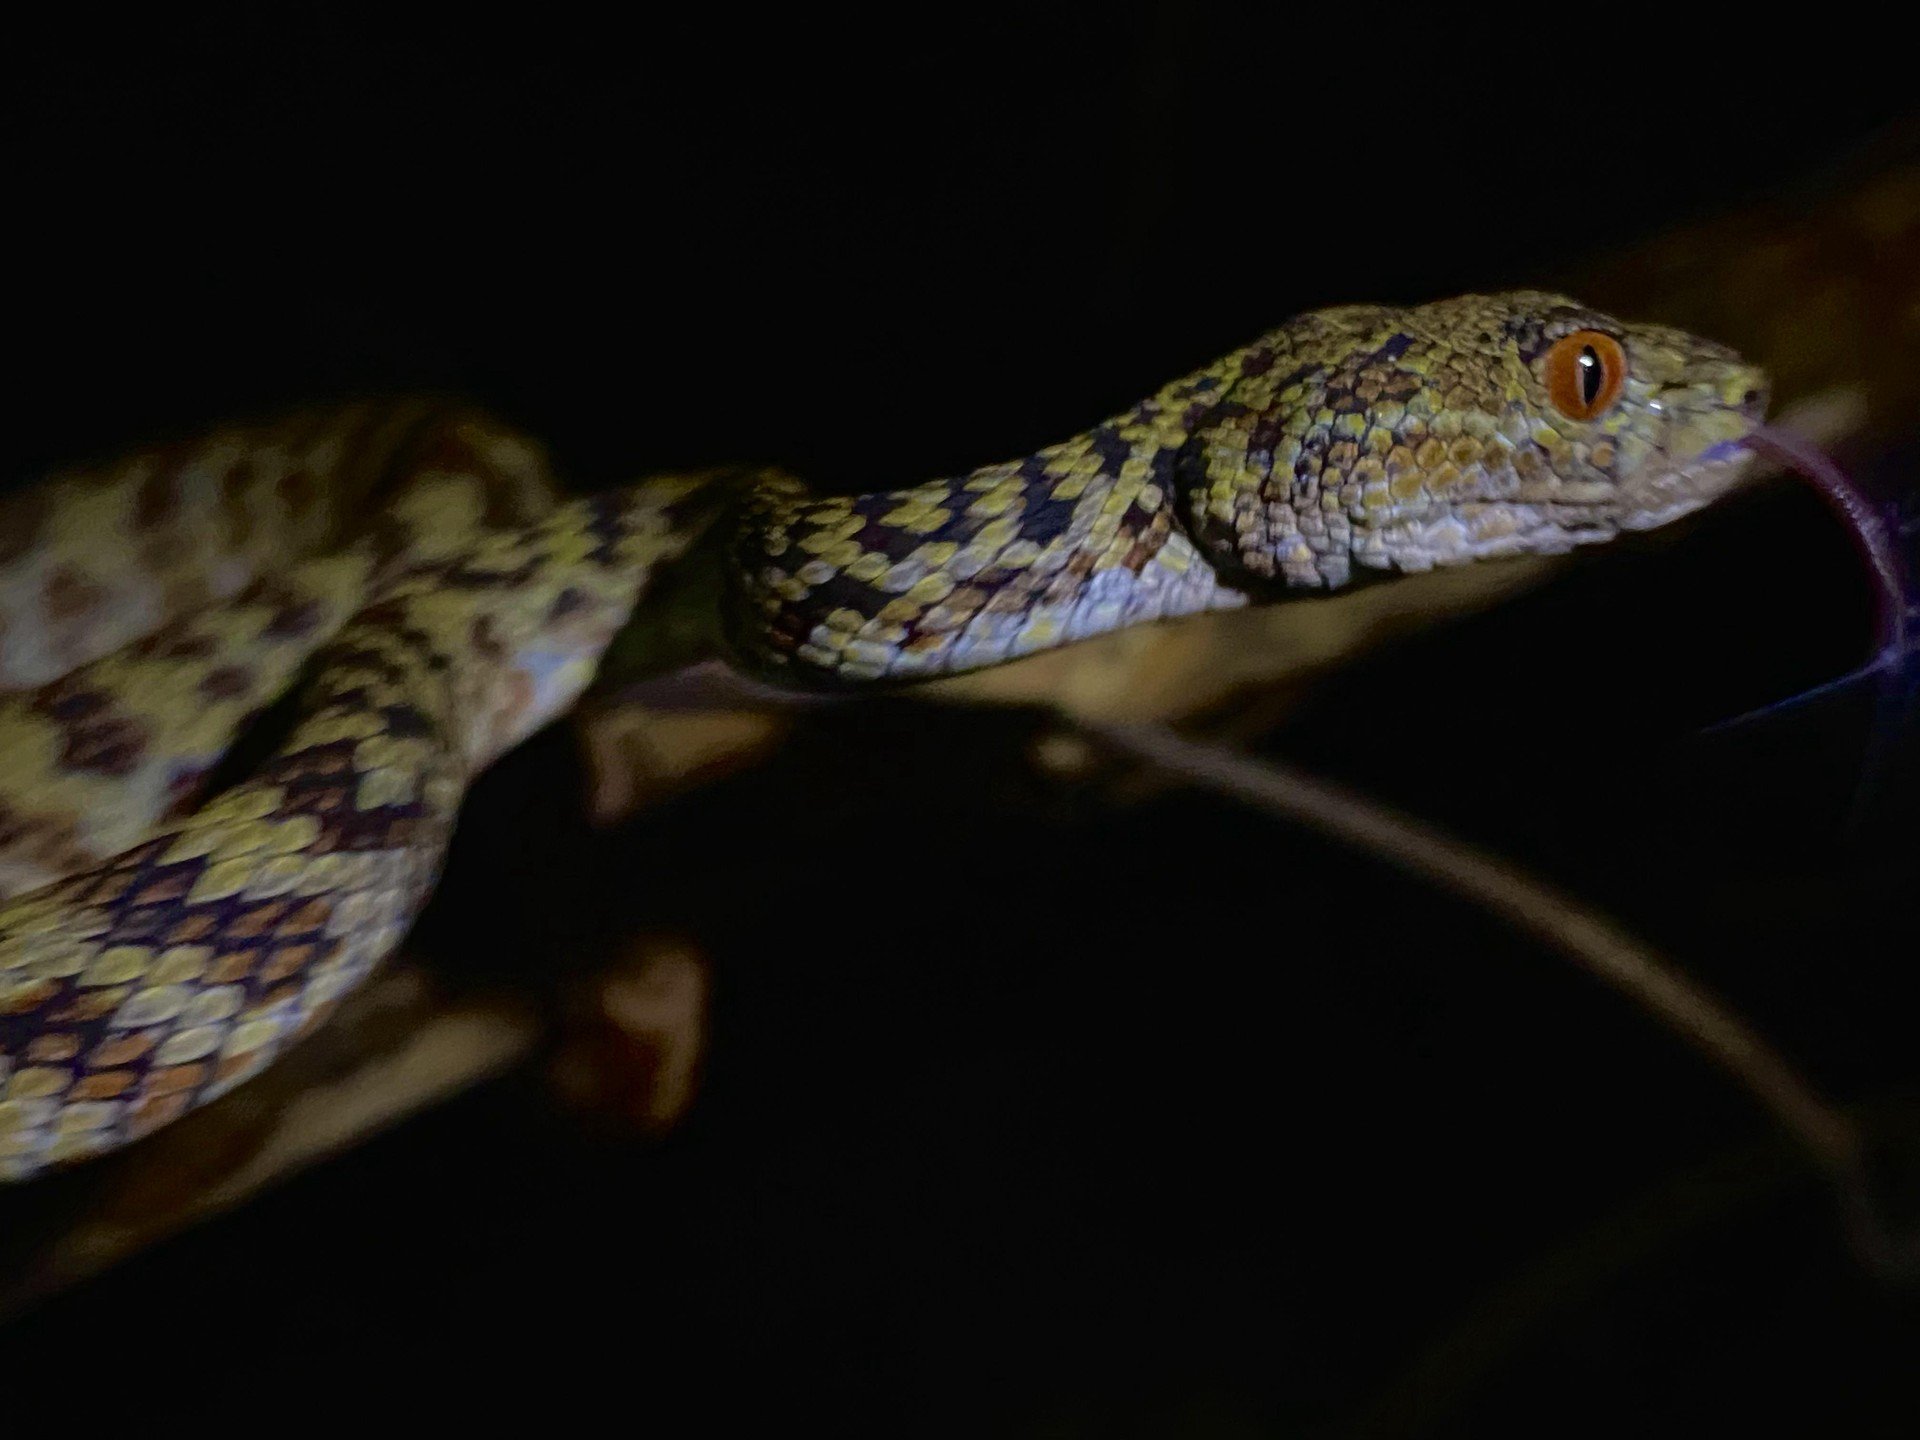 Found this stunning beauty on Hon Son Island! The Hon Son Pit Viper is endemic to this island and finding two nestled together was unreal! Had to crawl through a cave to meet them, but totally worth it for this once-in-a-lifetime experience! #honsoni